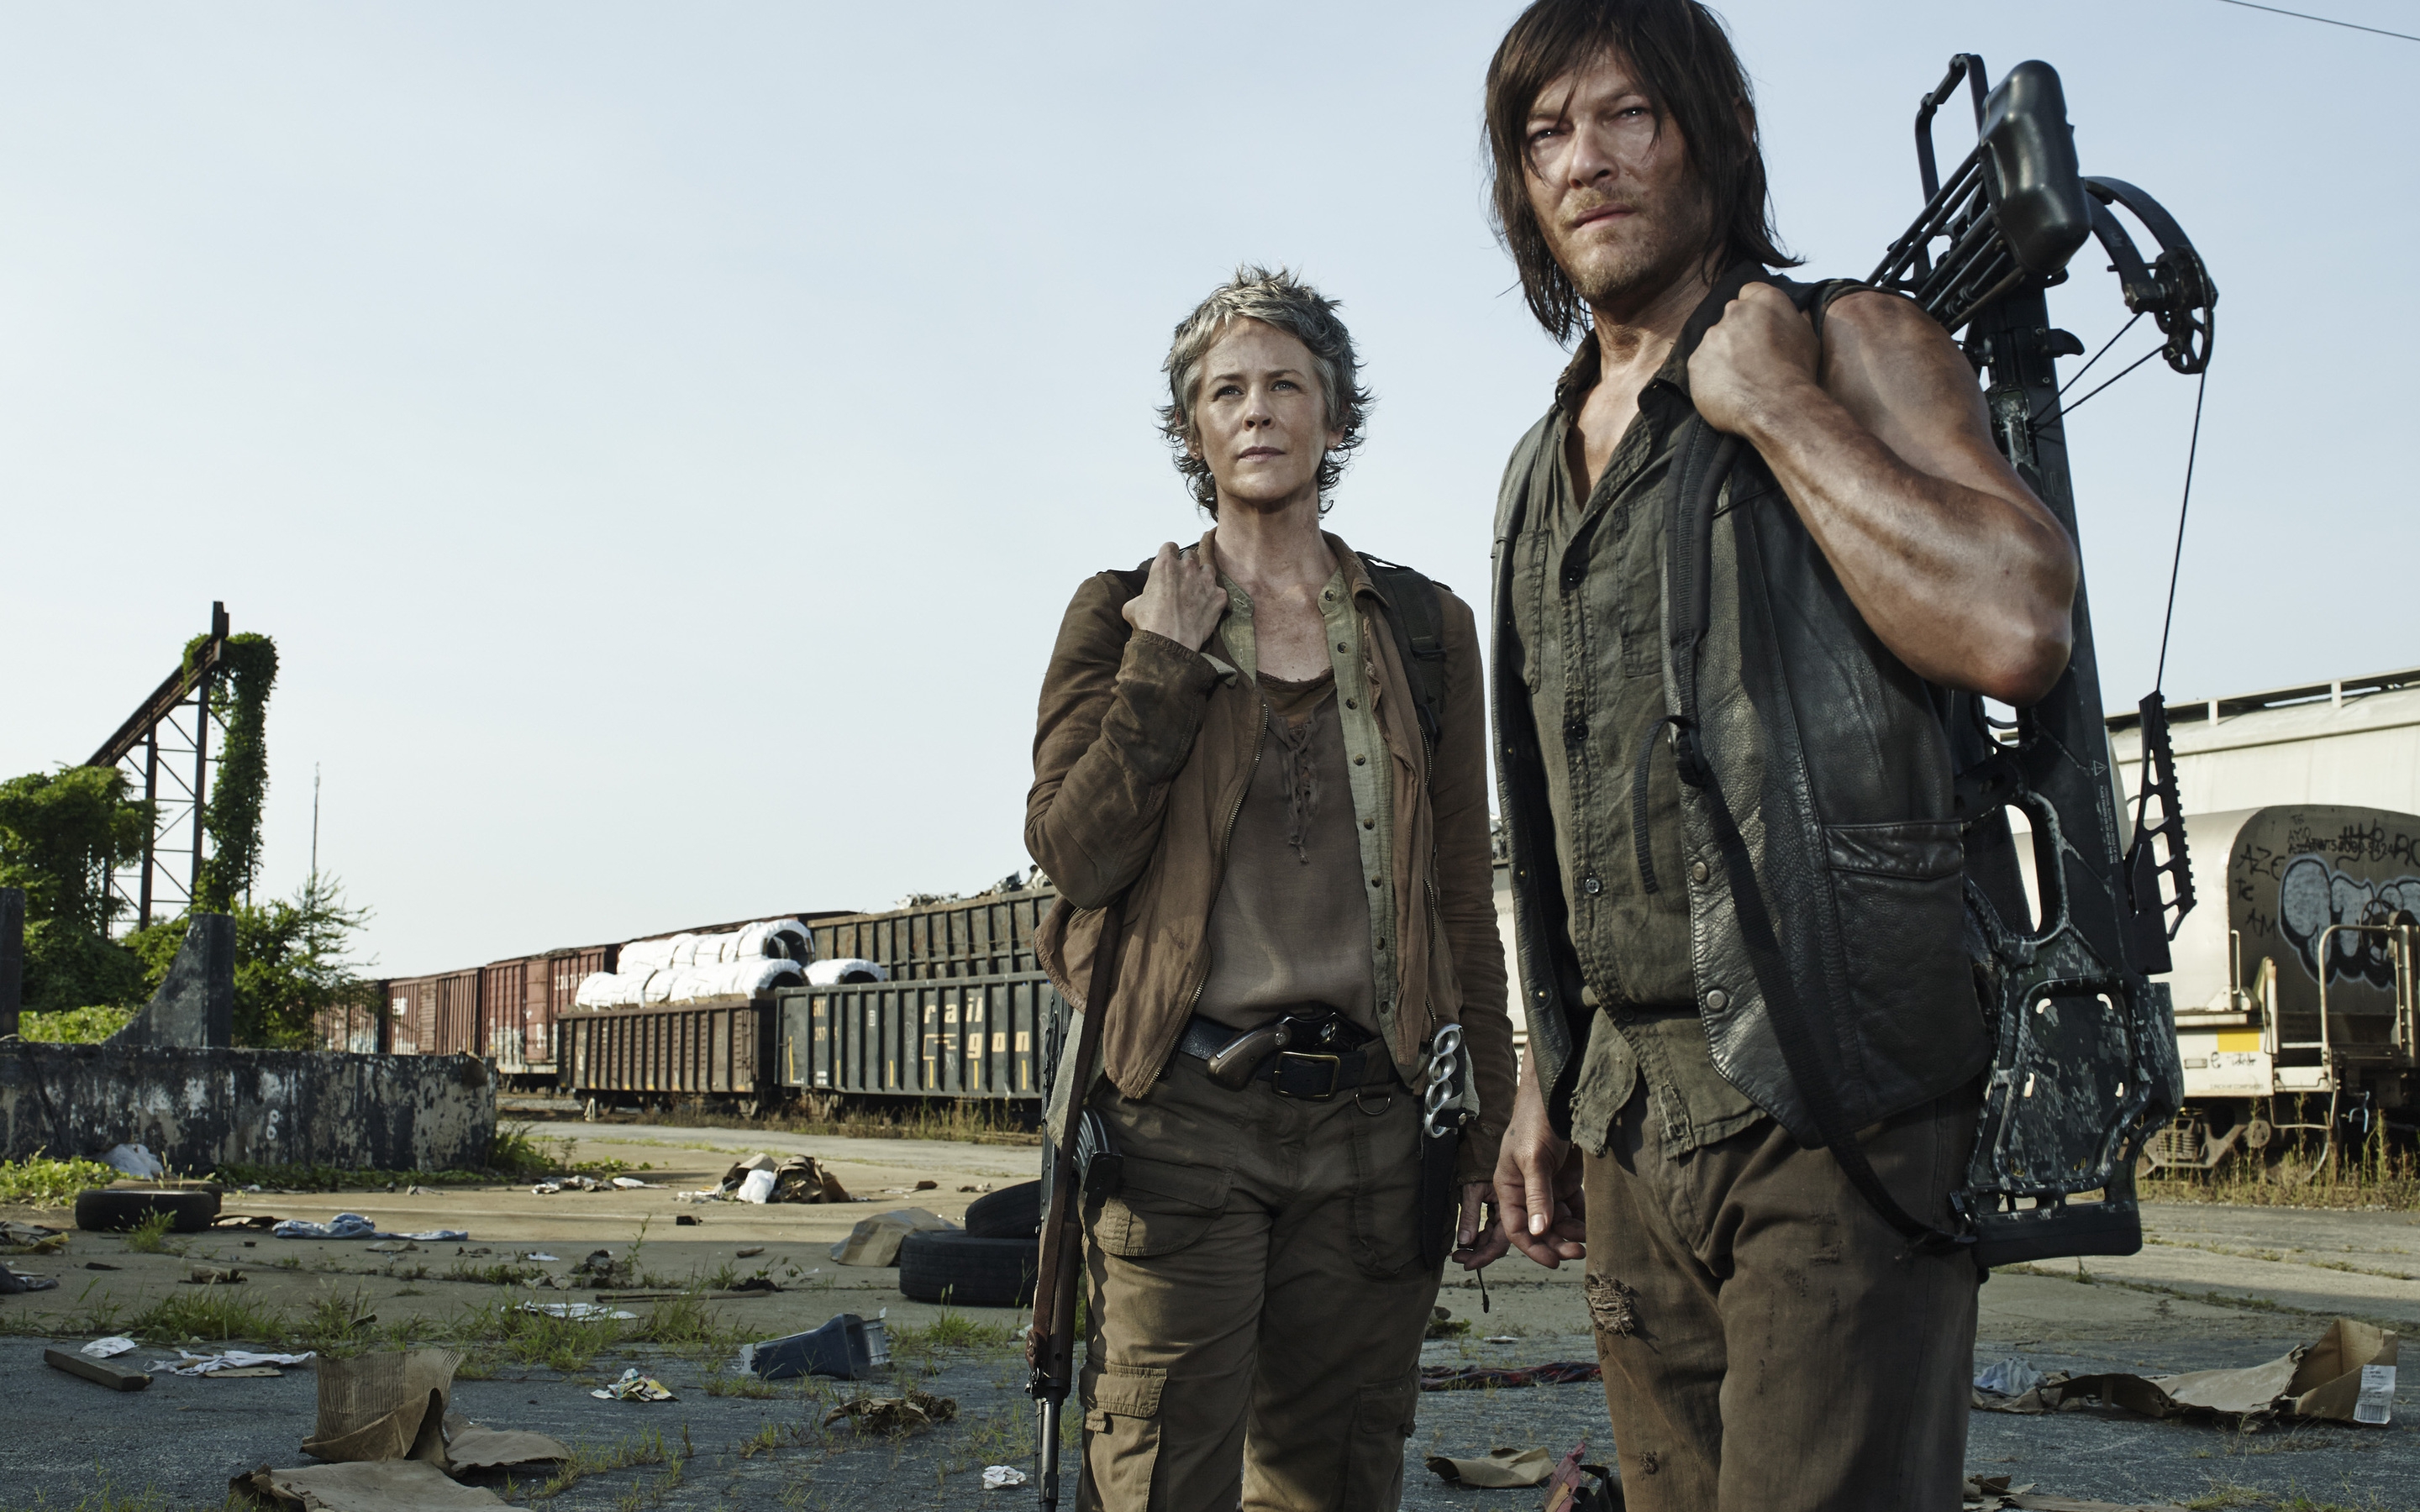 The Walking Dead Carol and Daryl for 2880 x 1800 Retina Display resolution